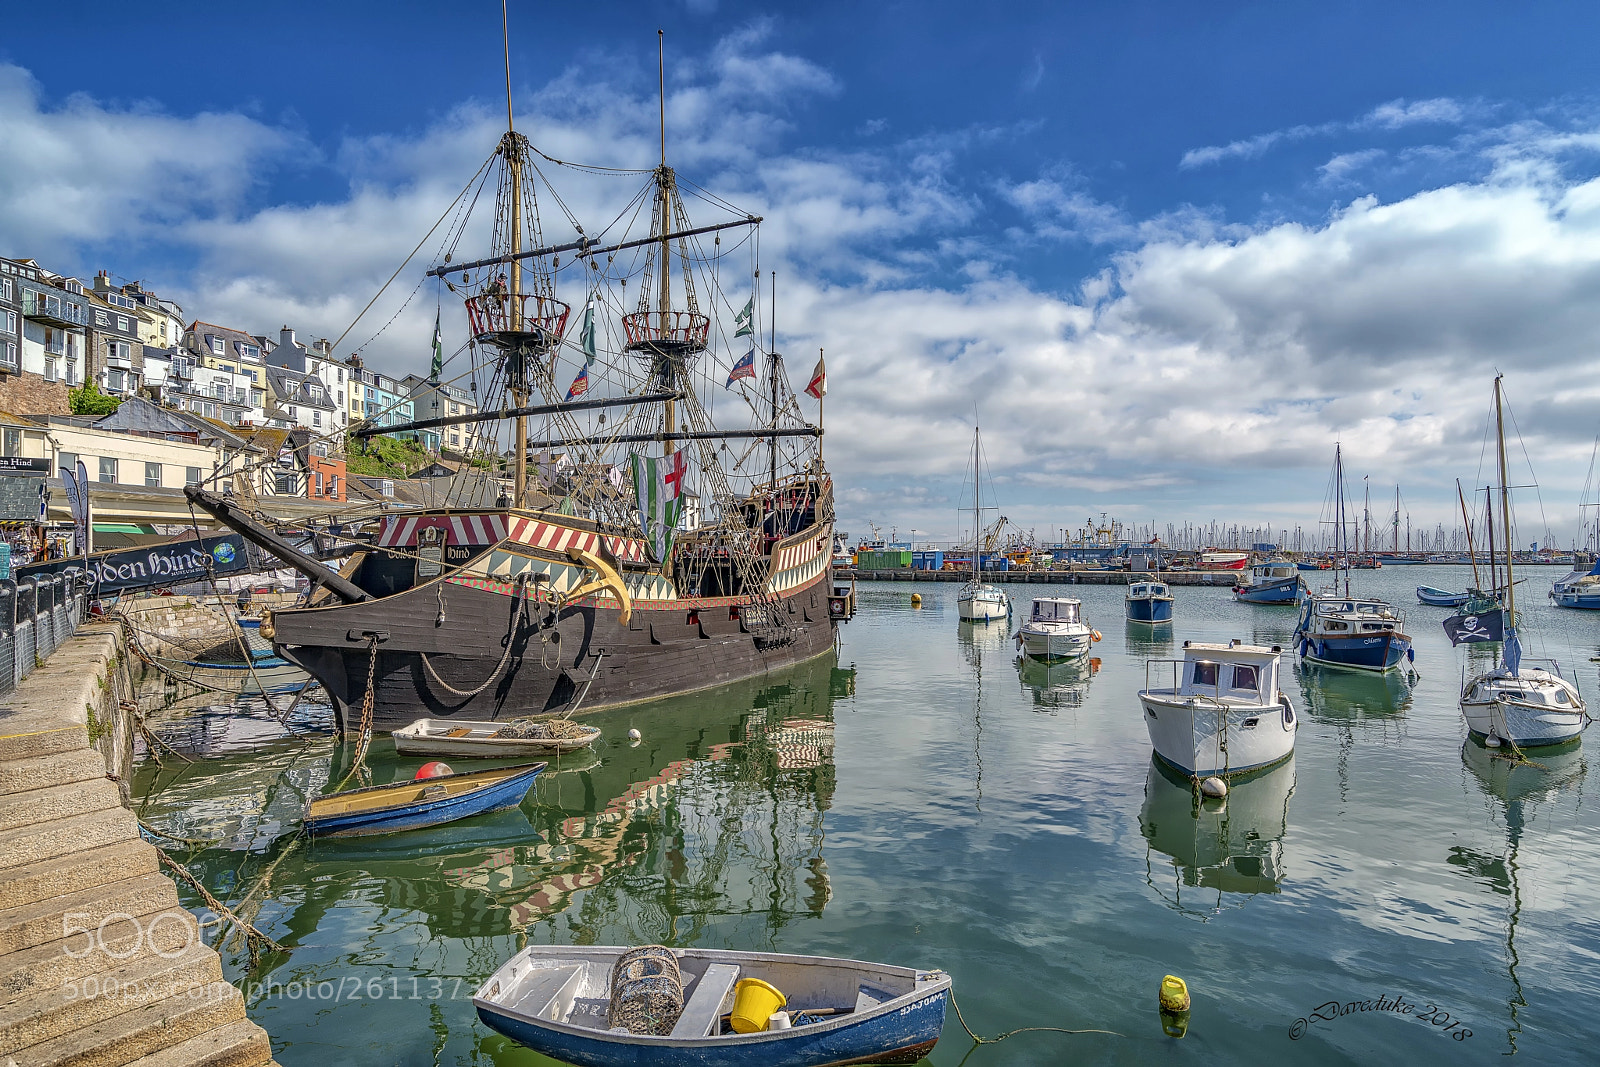 Sony a7R II sample photo. The golden hind, brixham. photography